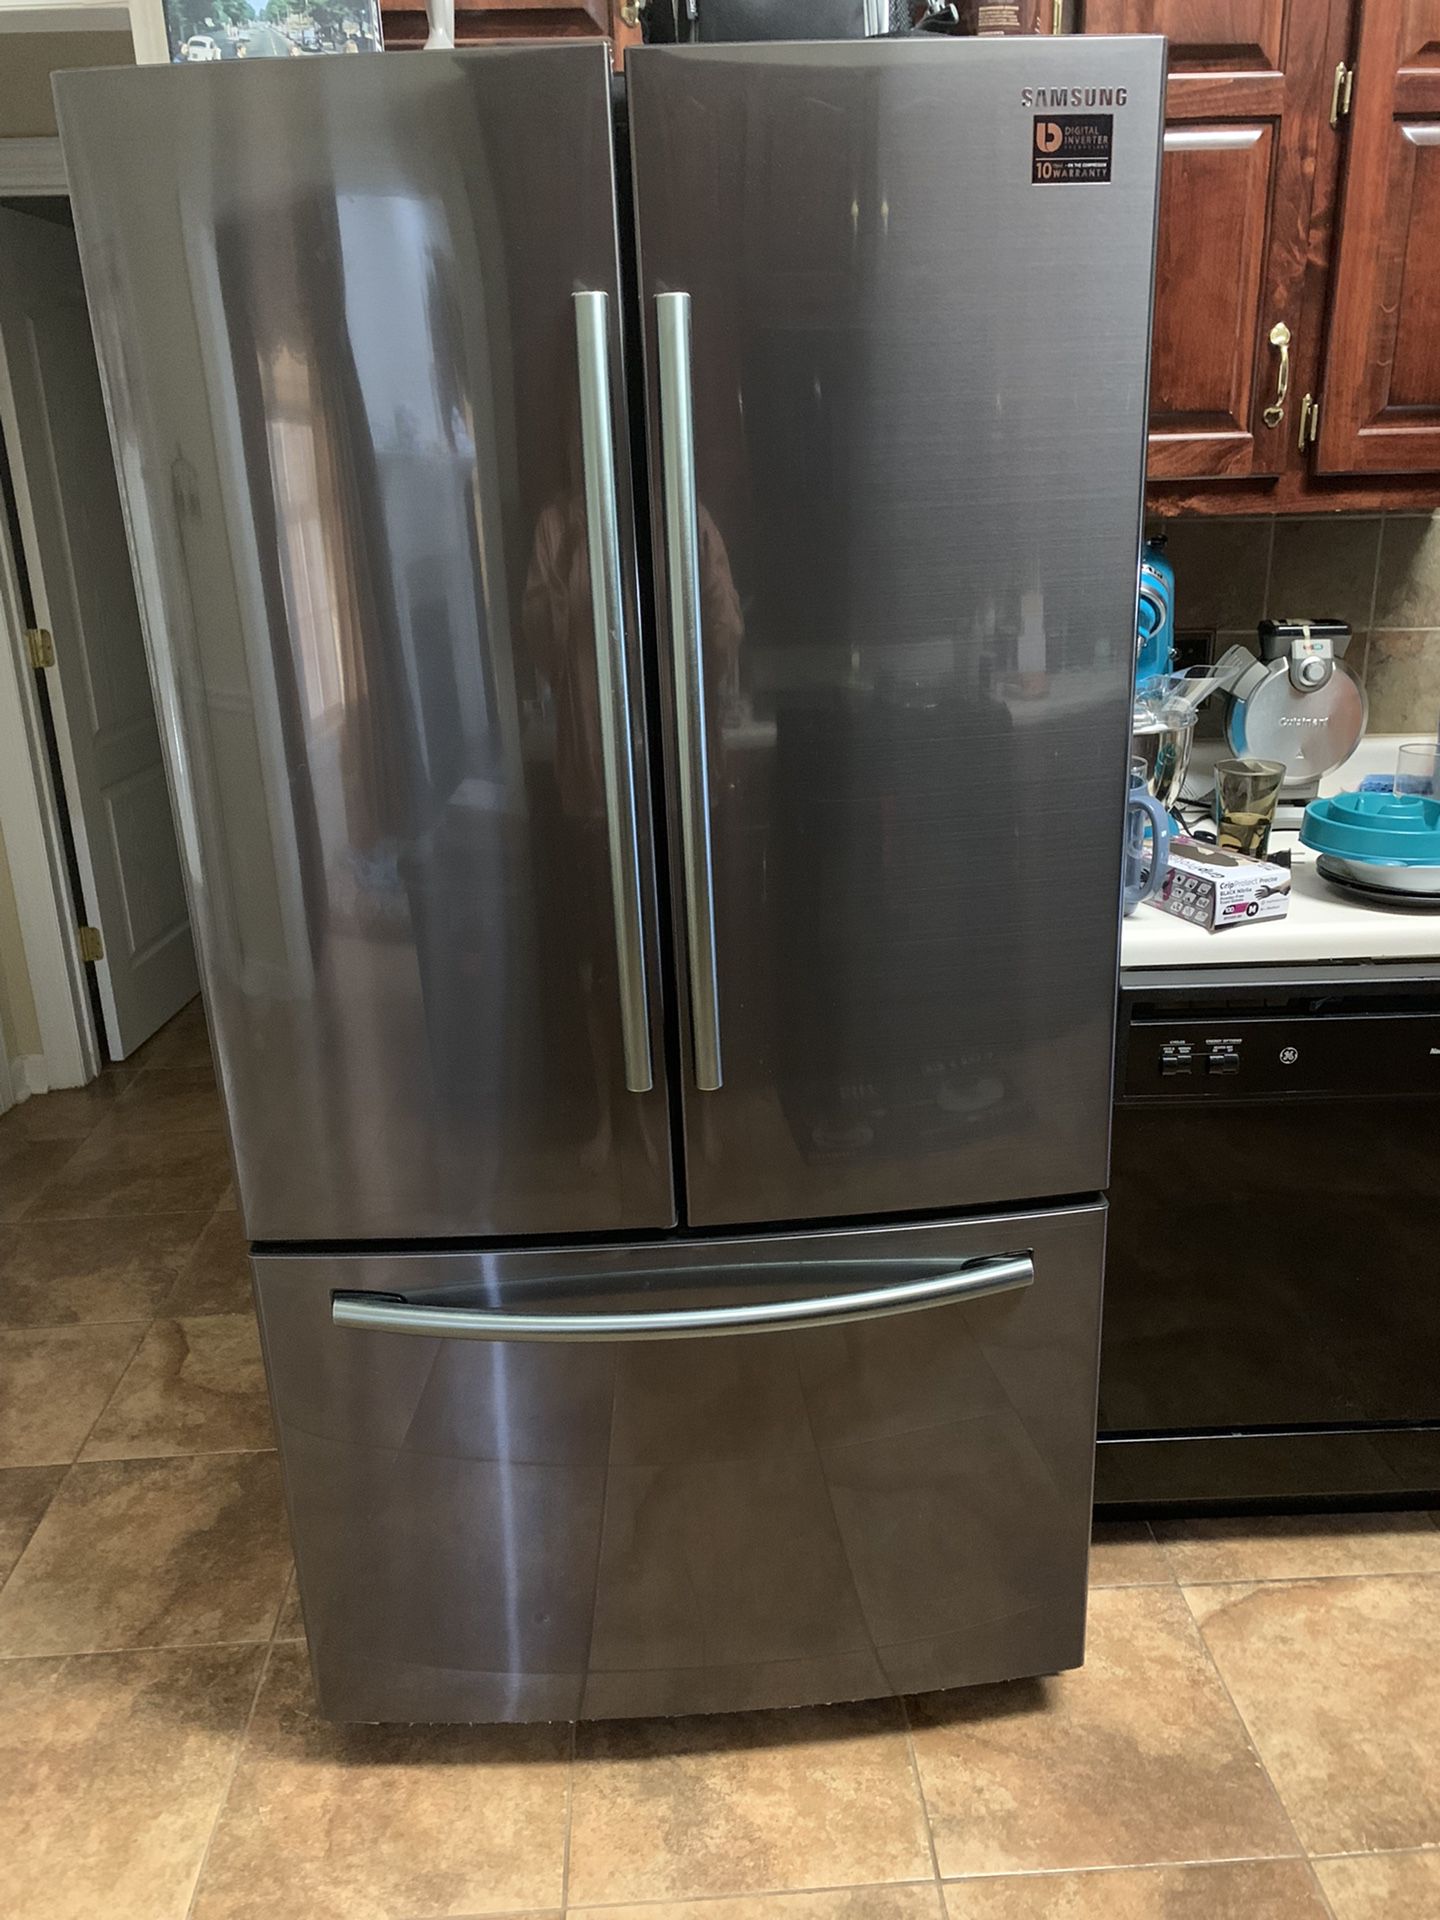 Samsung French Doors Stainless Steel Refrigerator 